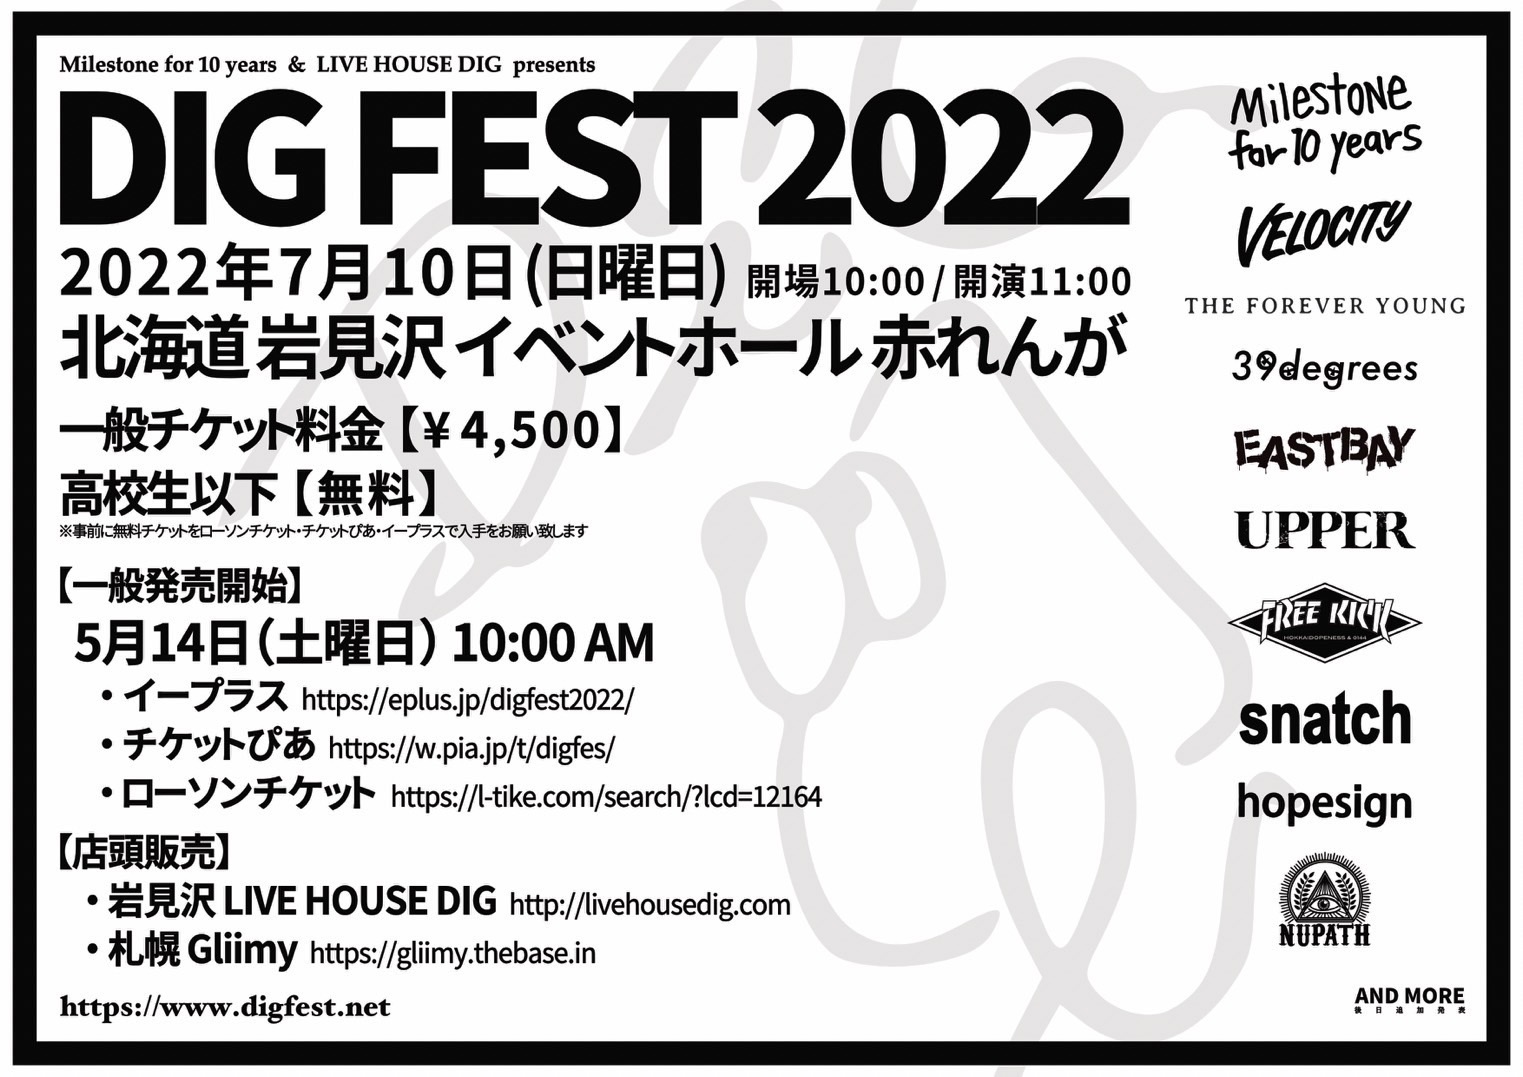 Milestone for 10 years & LIVEHOUSE DIG presents【DIG FEST 2022】の写真